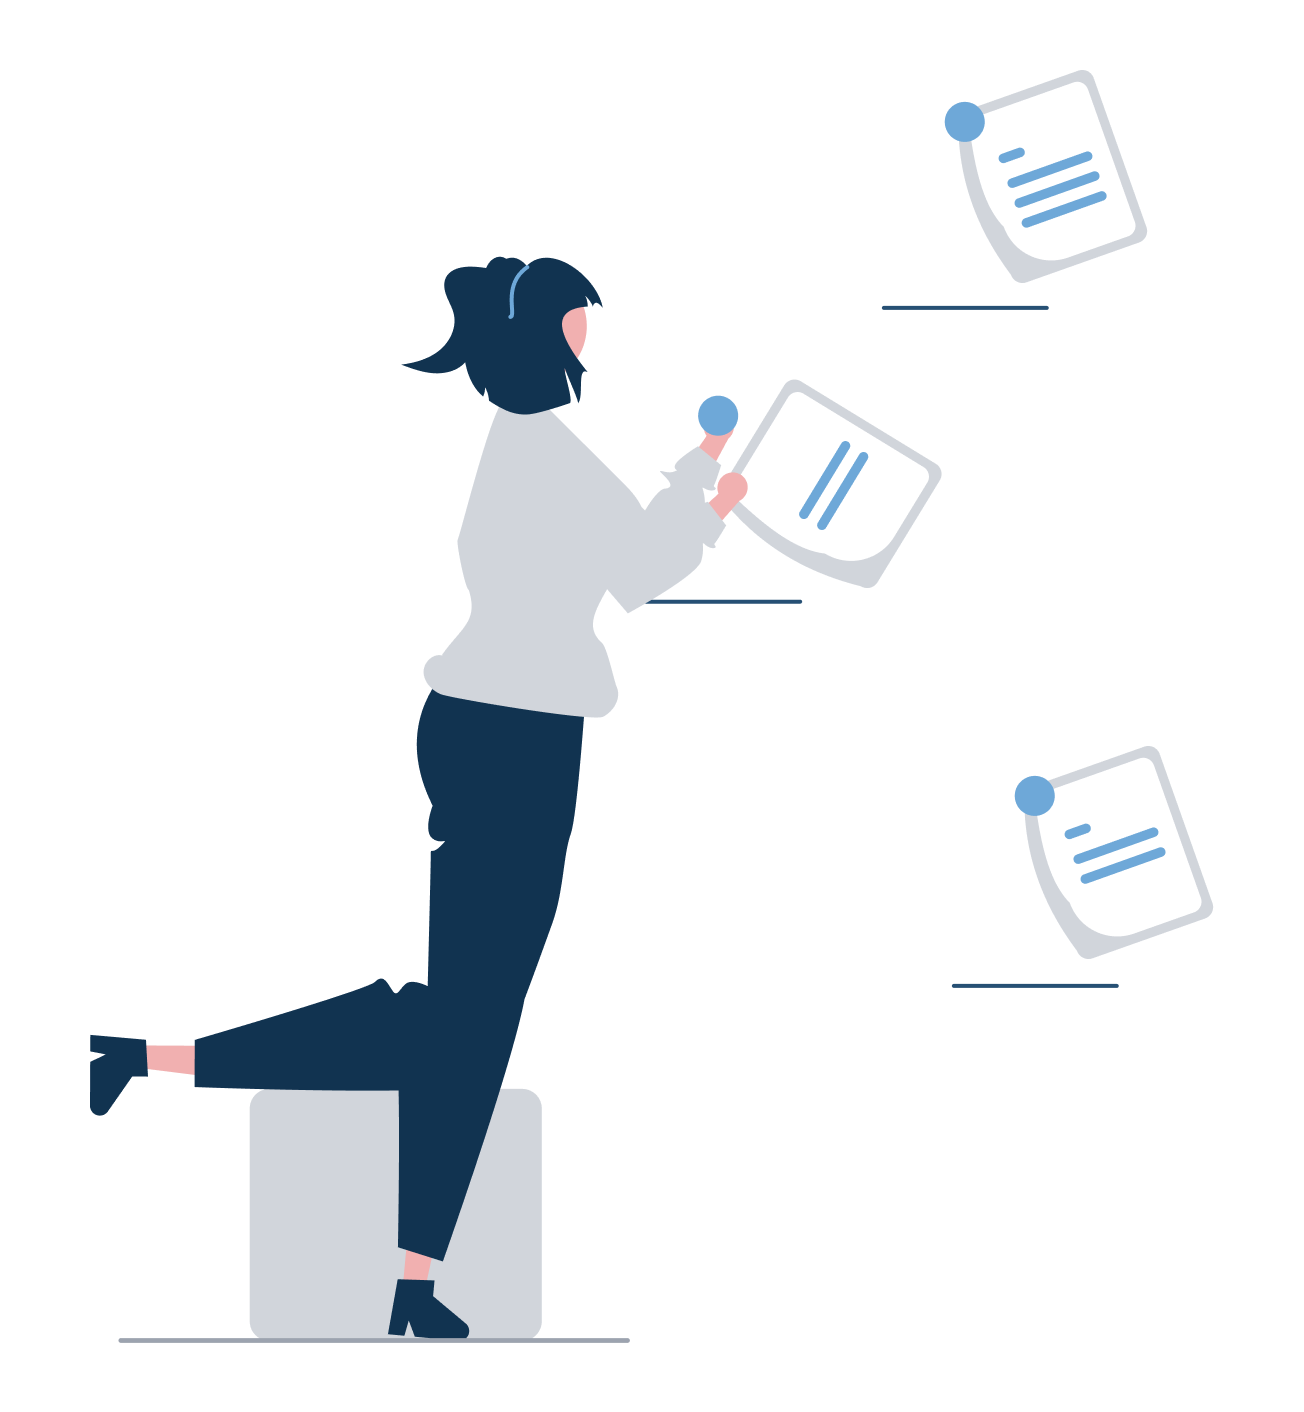 Illustration of a figure pinning documents